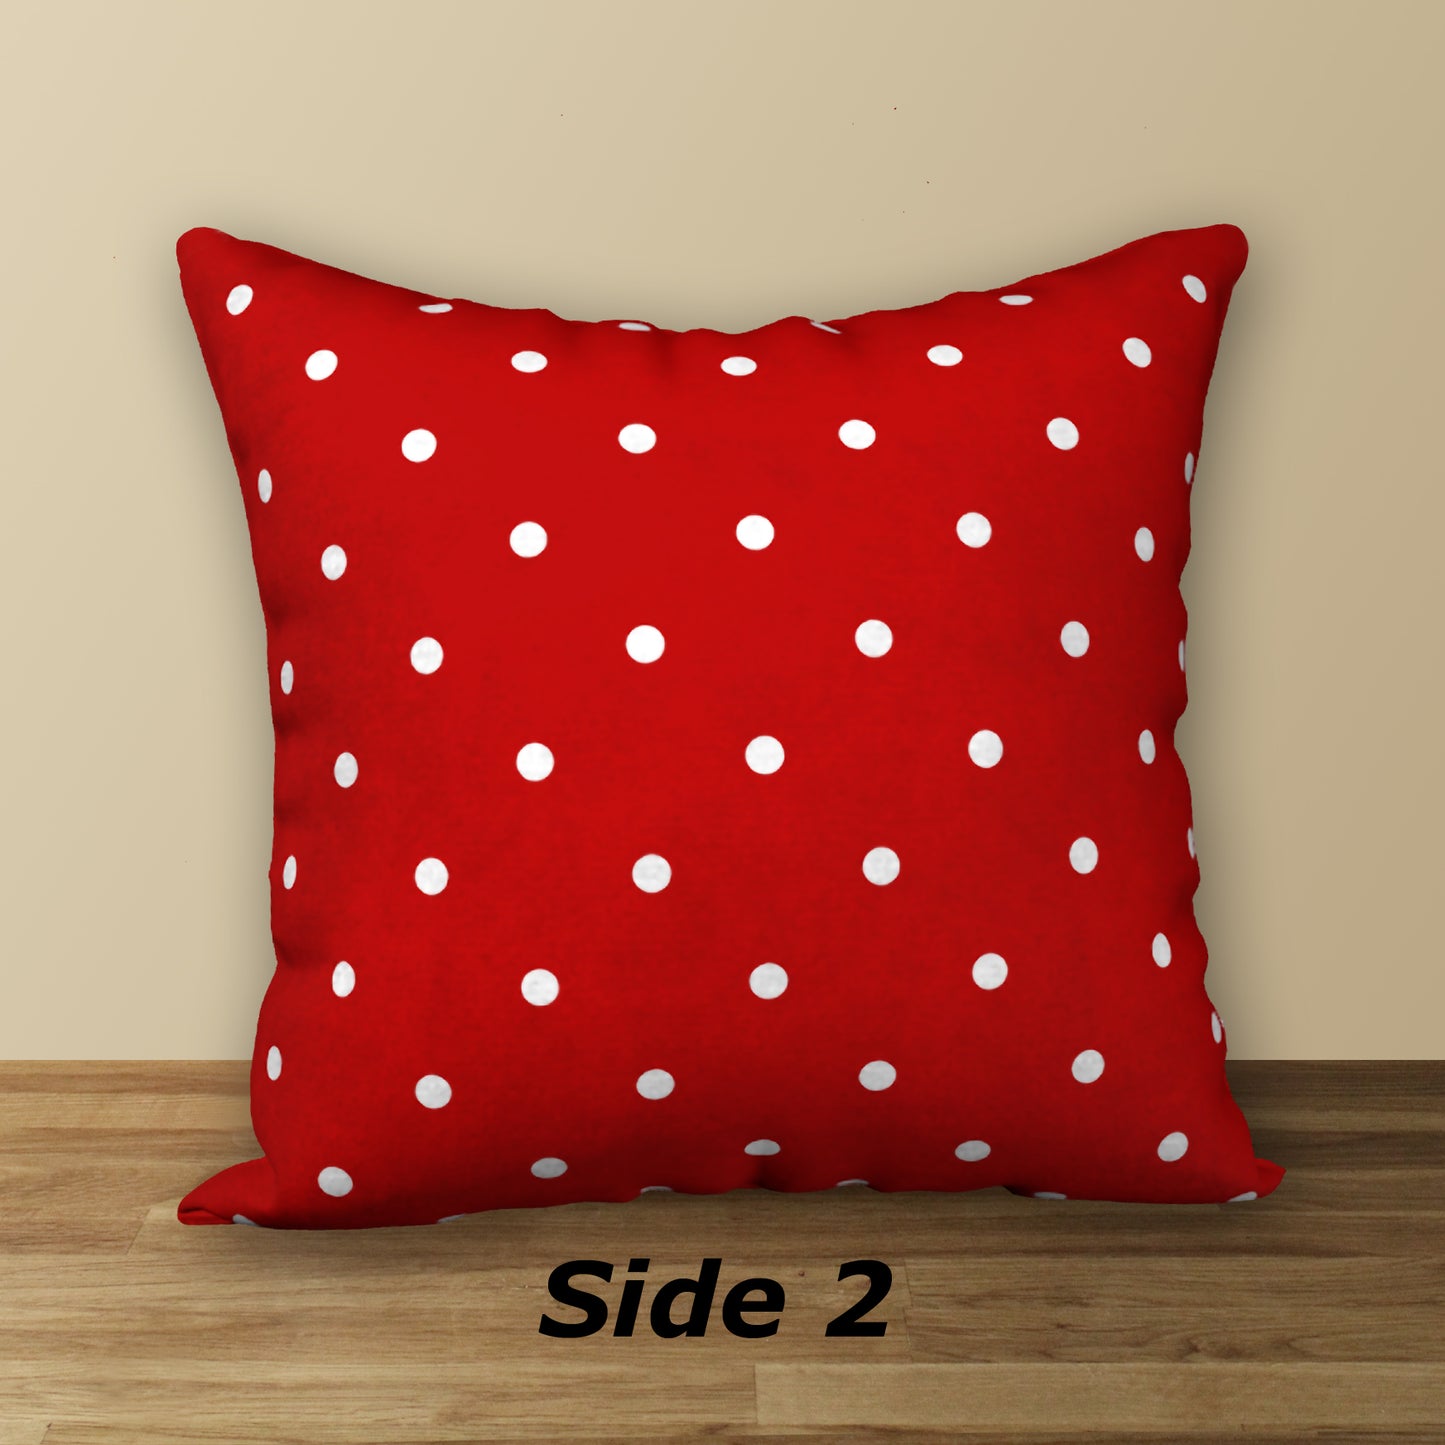 Red & White Designer Christmas Pillow Candy Cane Stripes with Polka Dots, 18"x18"